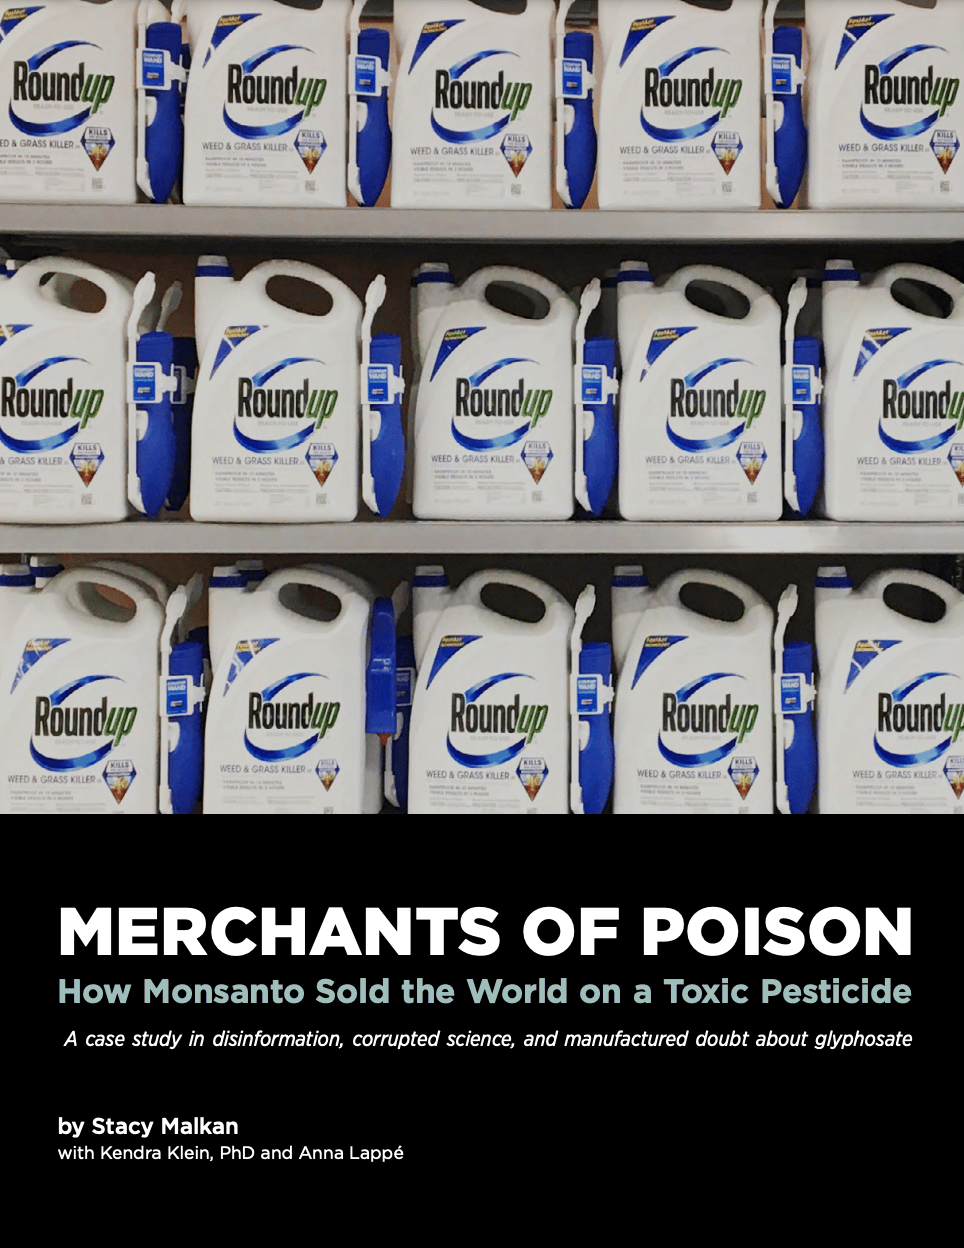 Merchants of Poison: How Monsanto Sold the World on a Toxic Pesticide